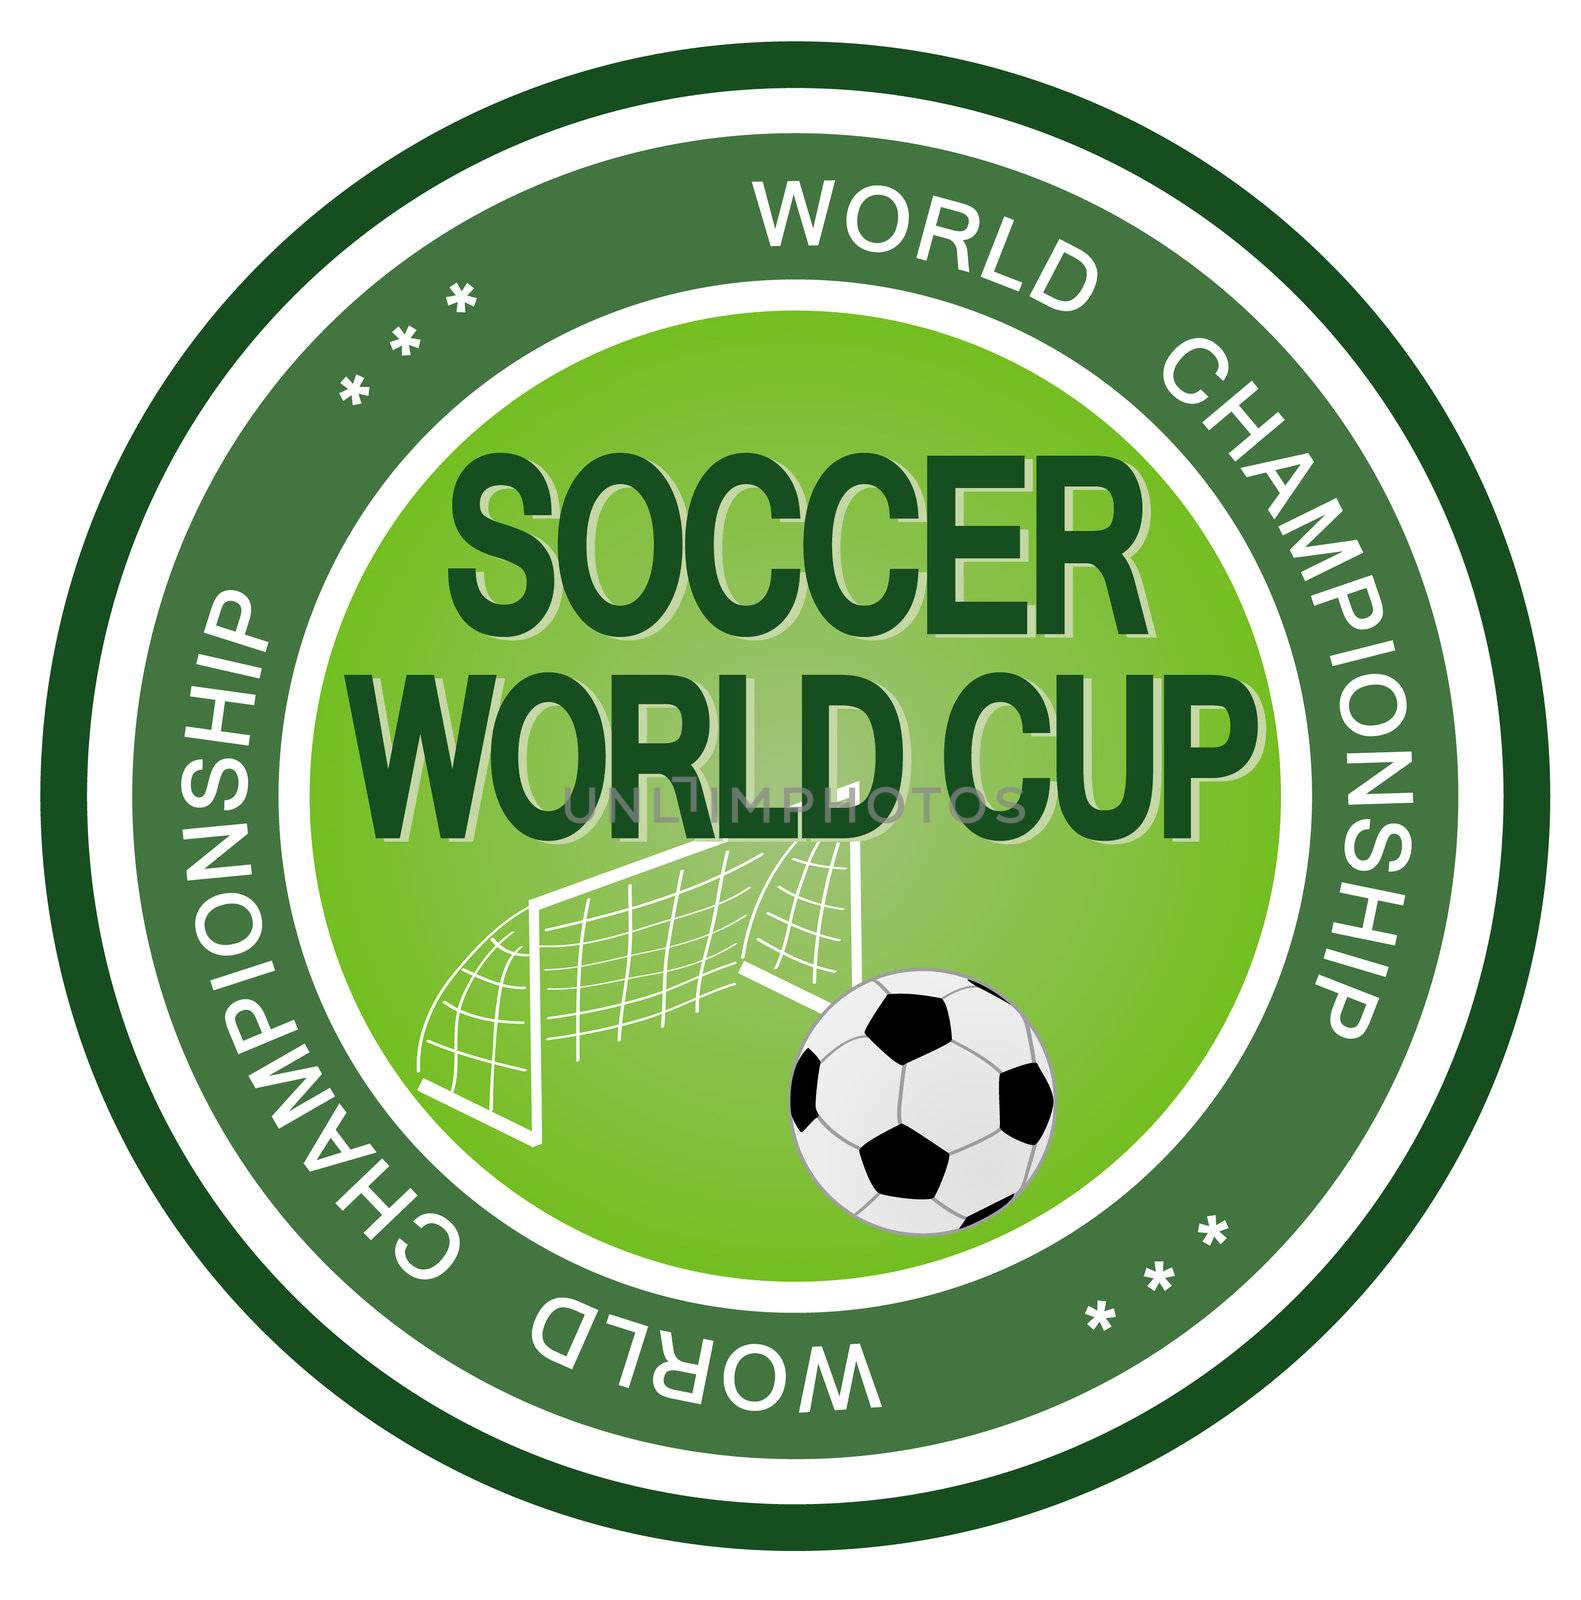 An illustrated badge symbolizing an upcoming soccer world cup.